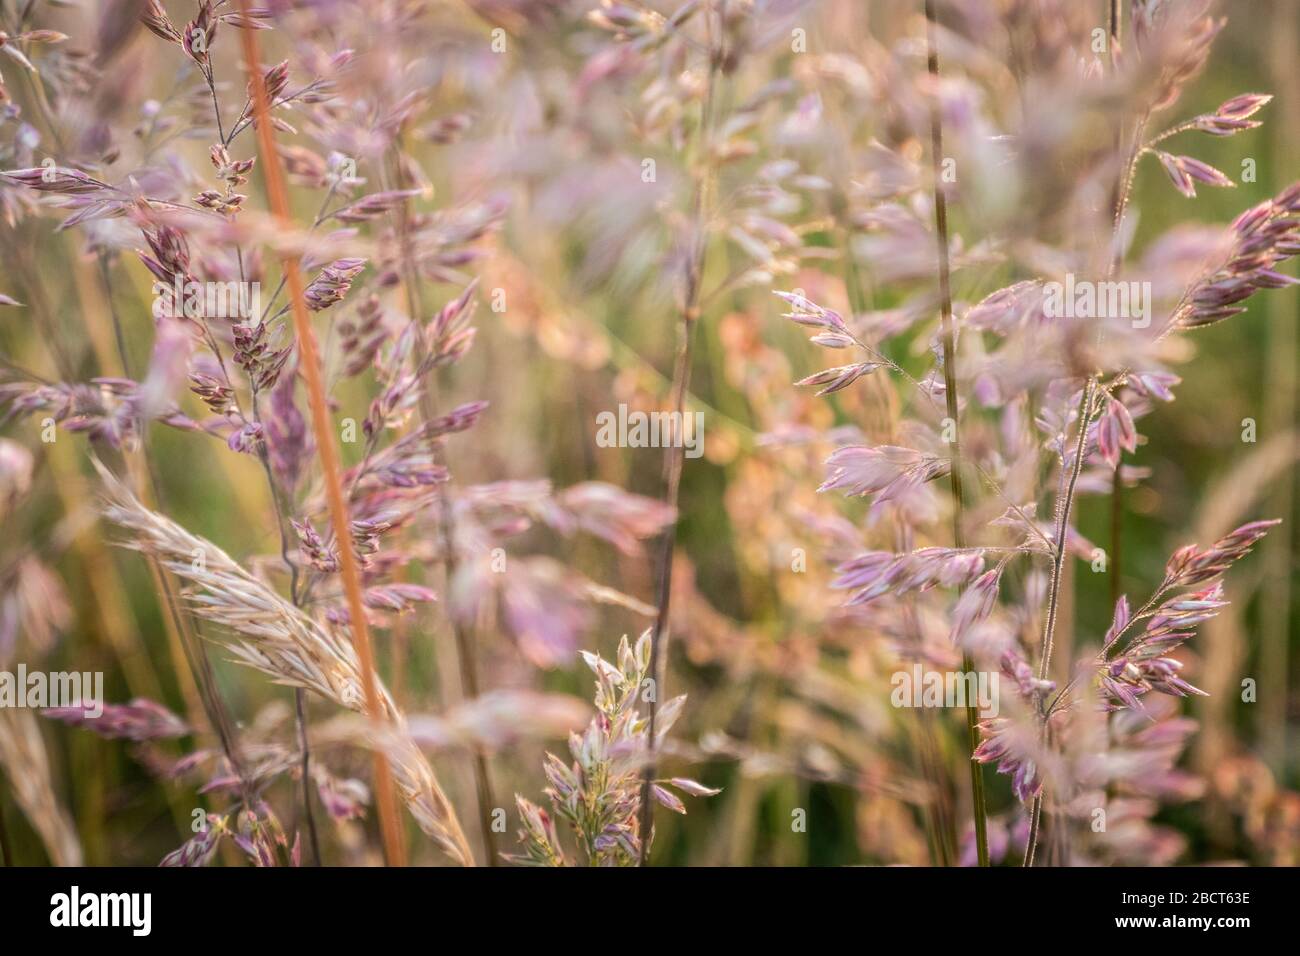 Grasses in a field meadow Stock Photo